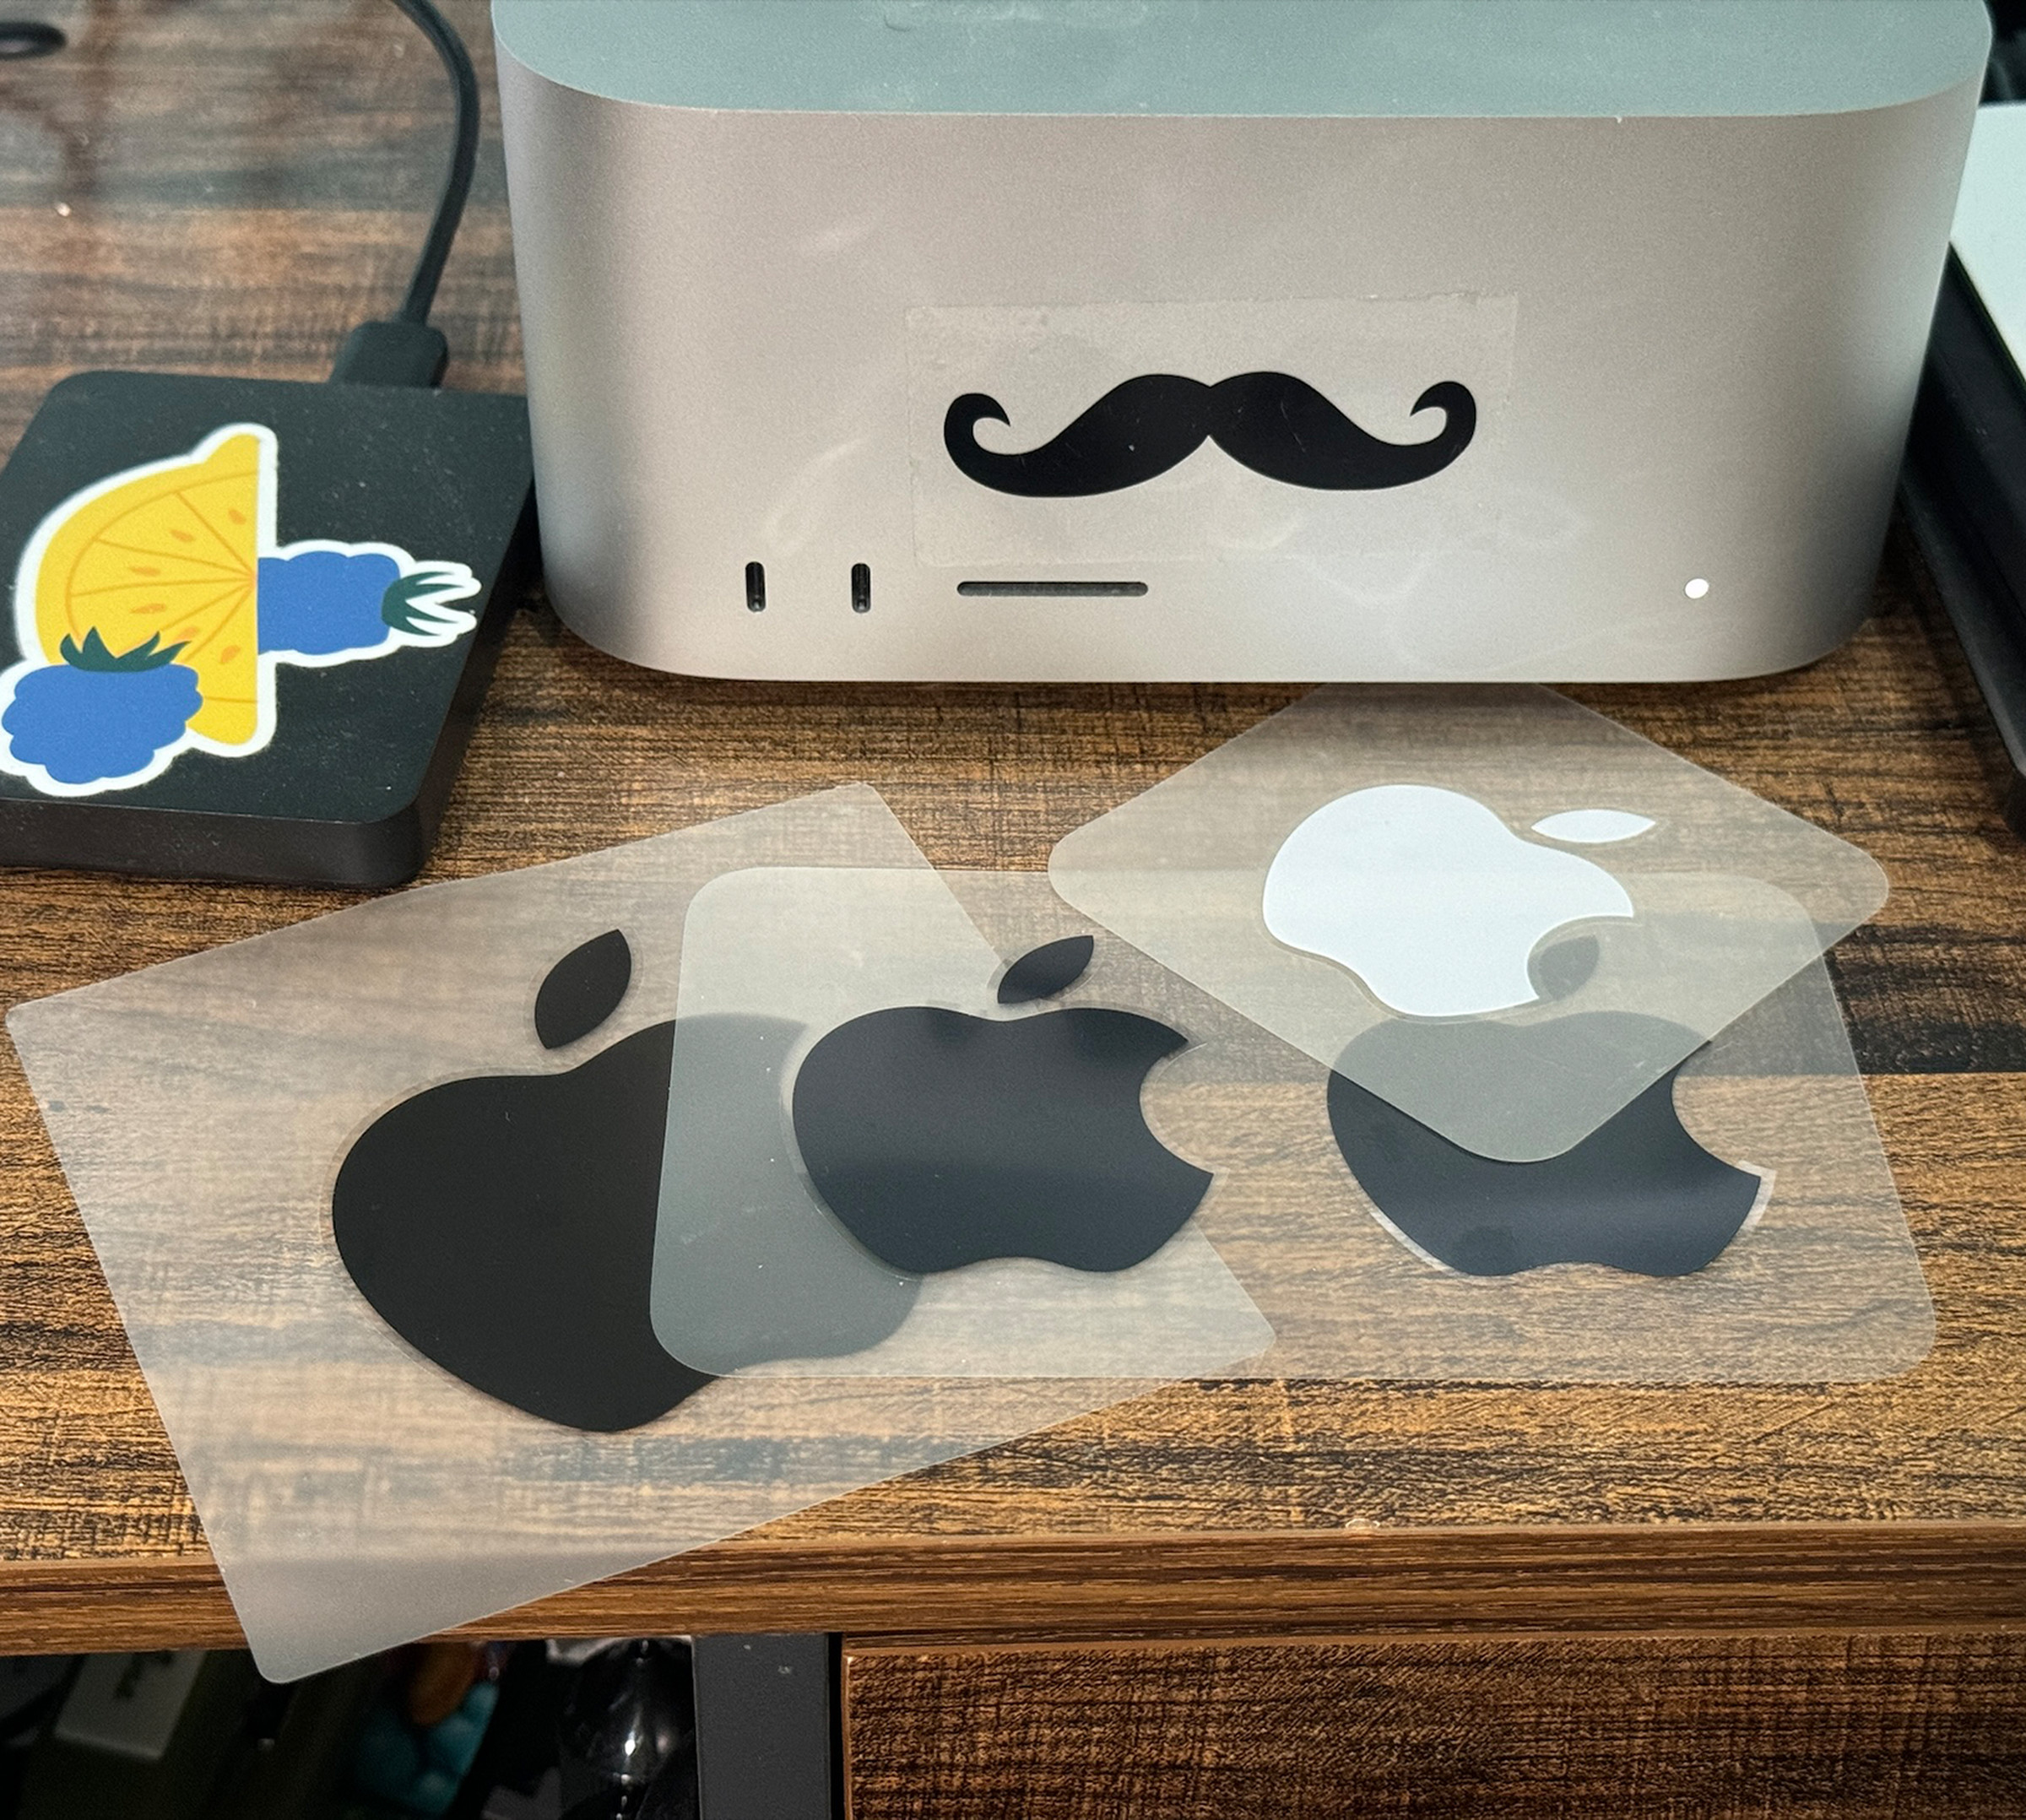 A picture of Apple stickers on a desk in front of a Mac Studio.